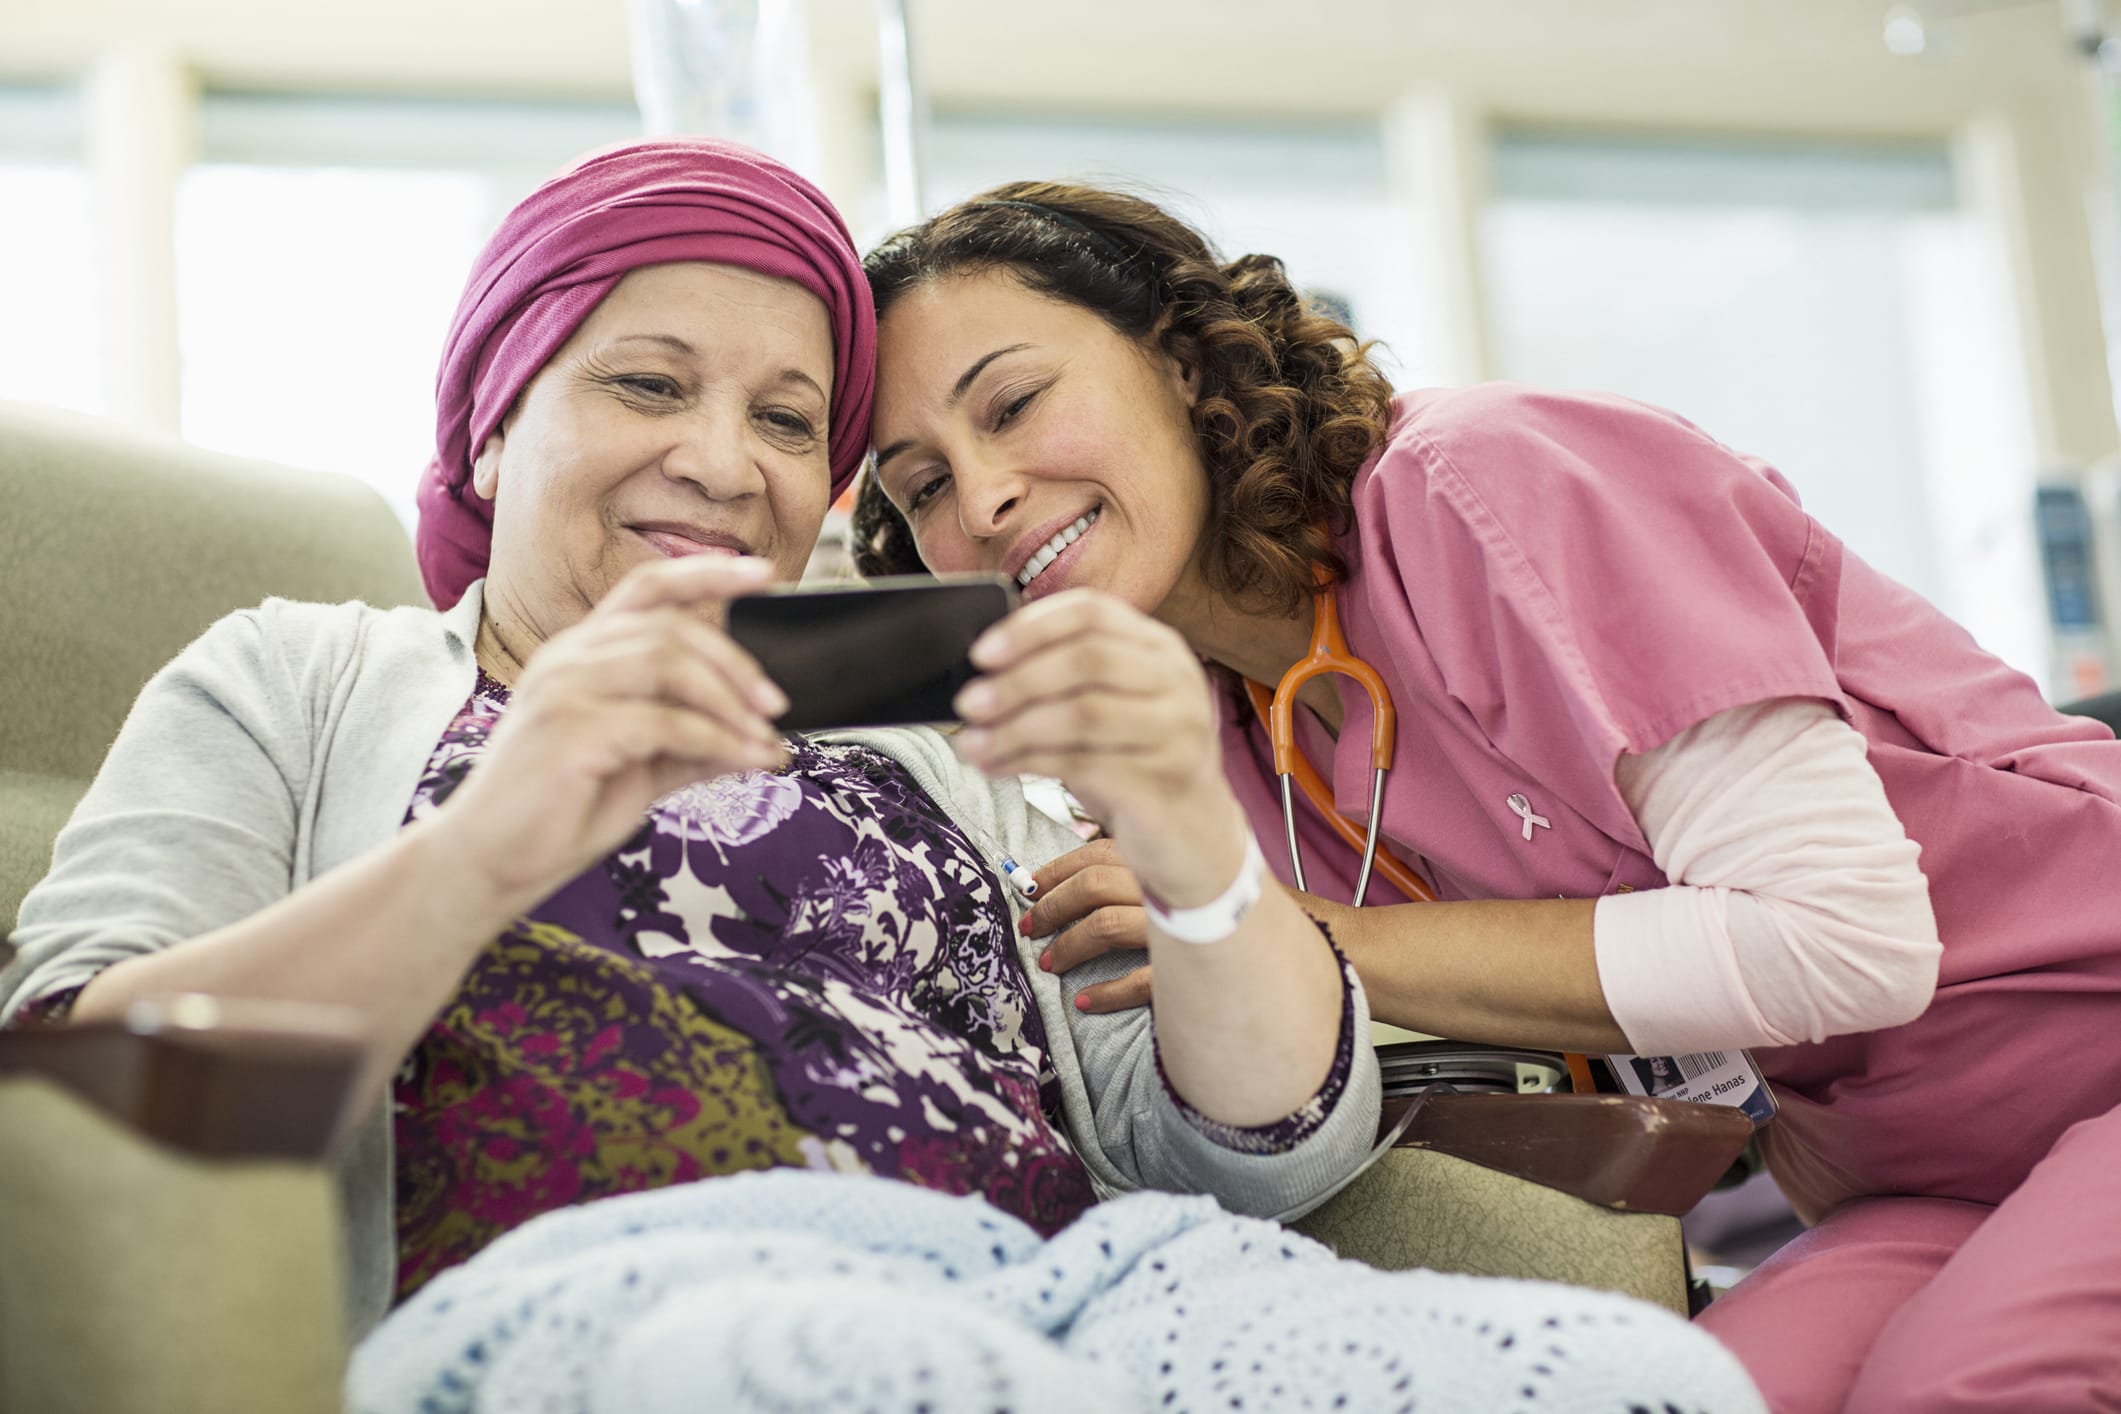 A chemotherapy patient and a cancer treatment specialist smile as they look at photos on a phone together 